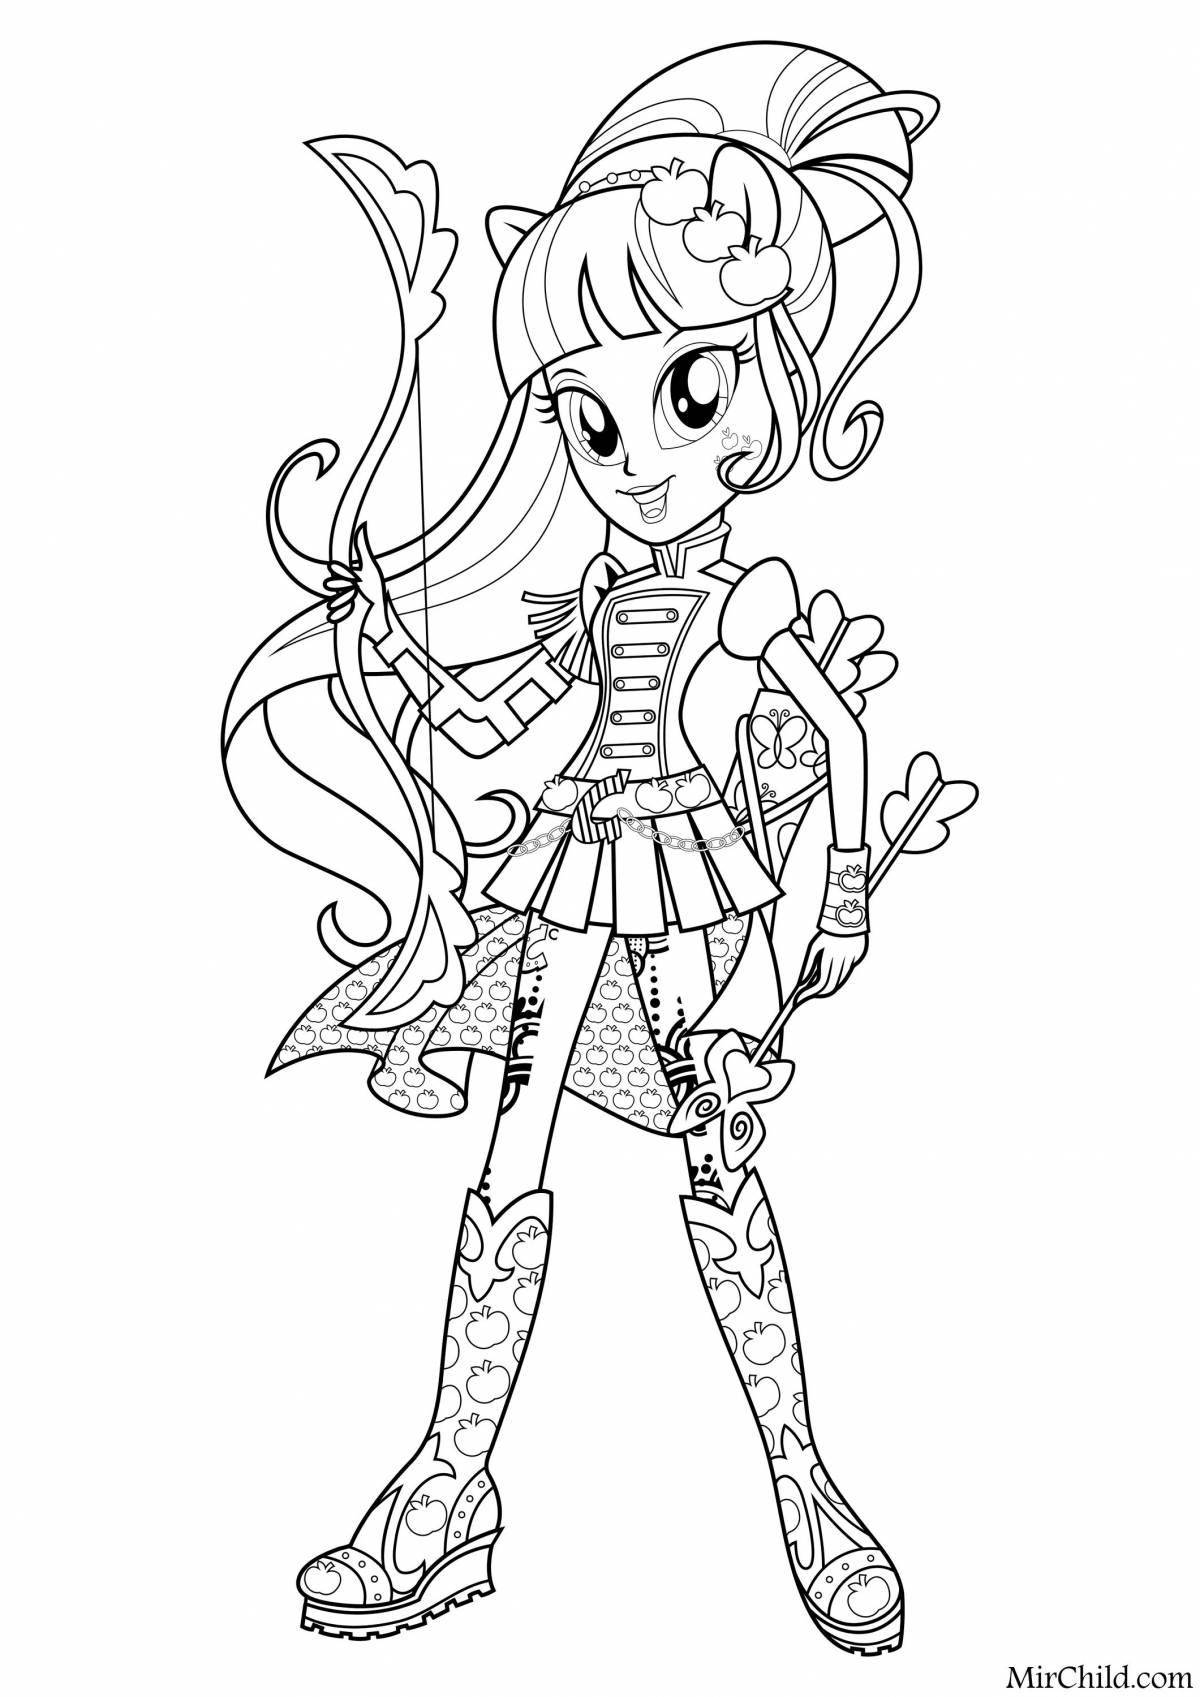 Playful equestria girl sparkle coloring page